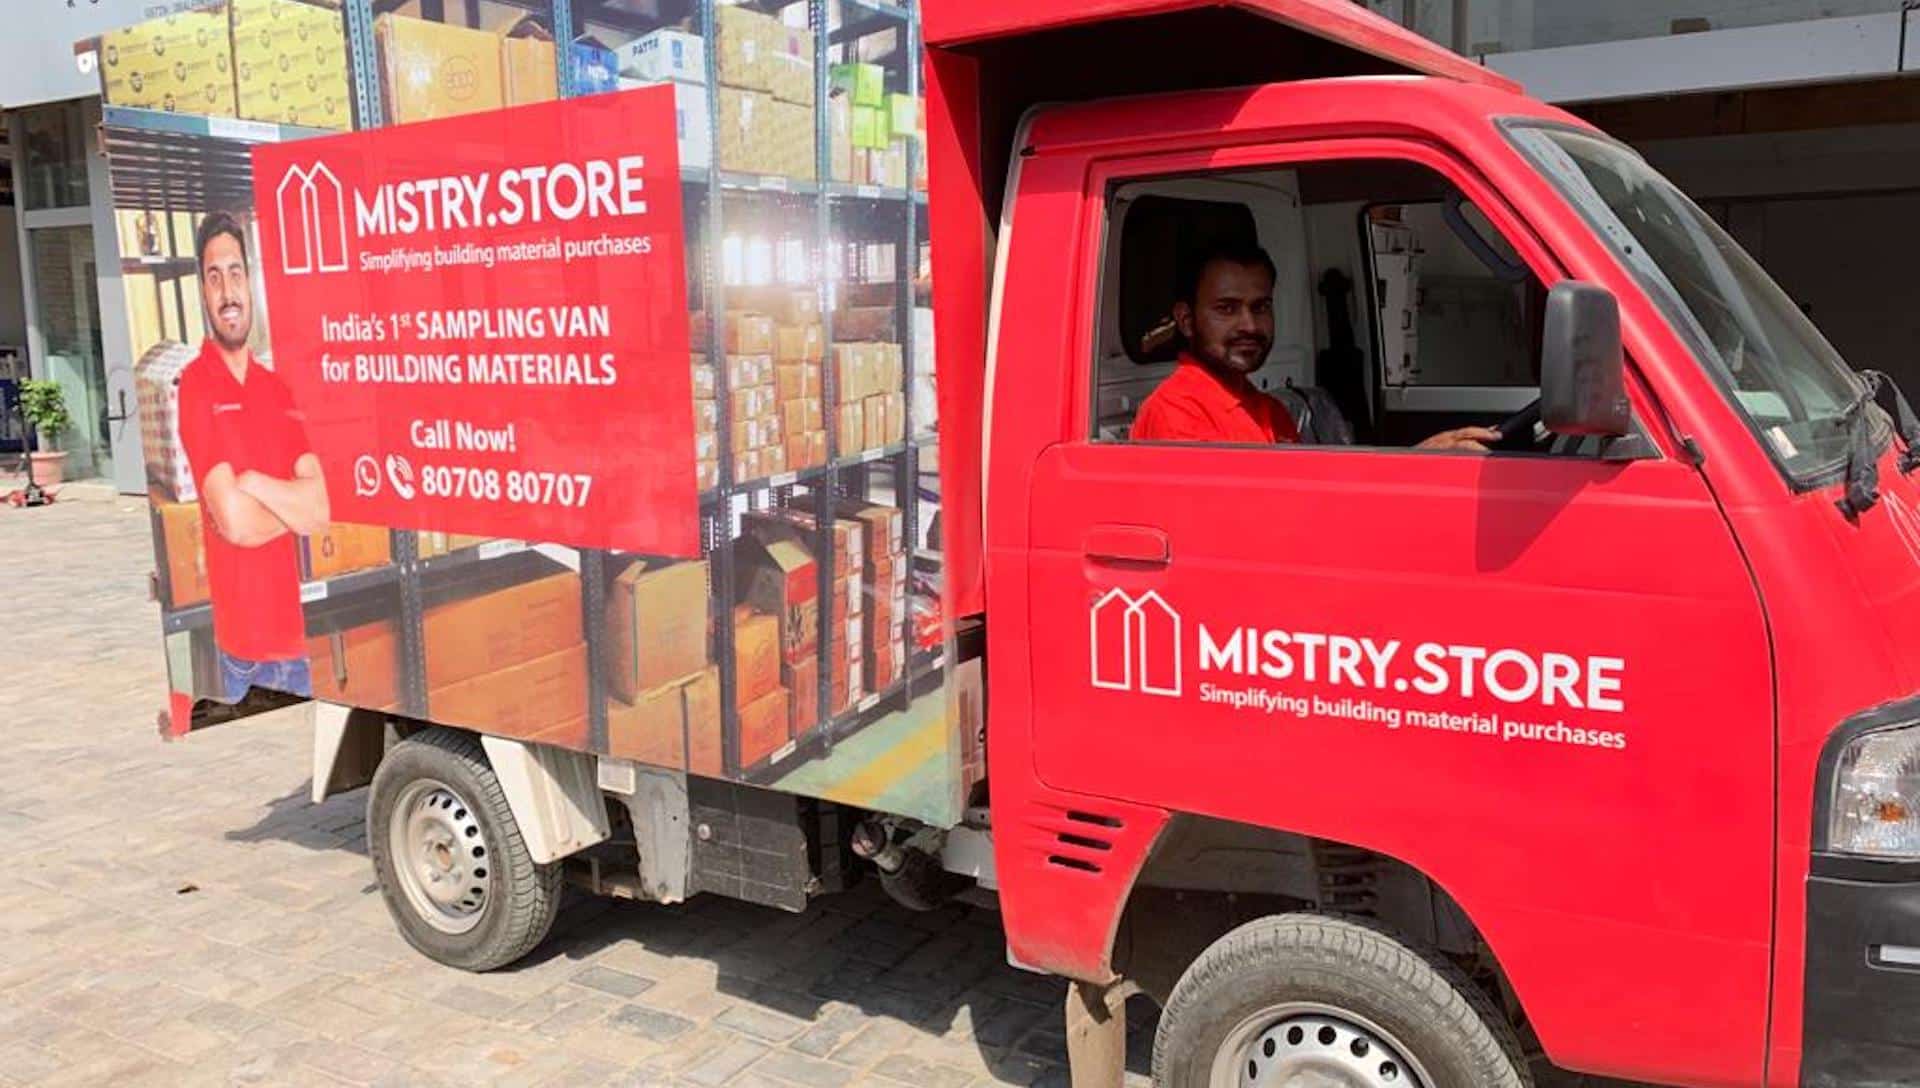 Build-tech platform Mistry.Store launches India’s first building material sampling van for professionals